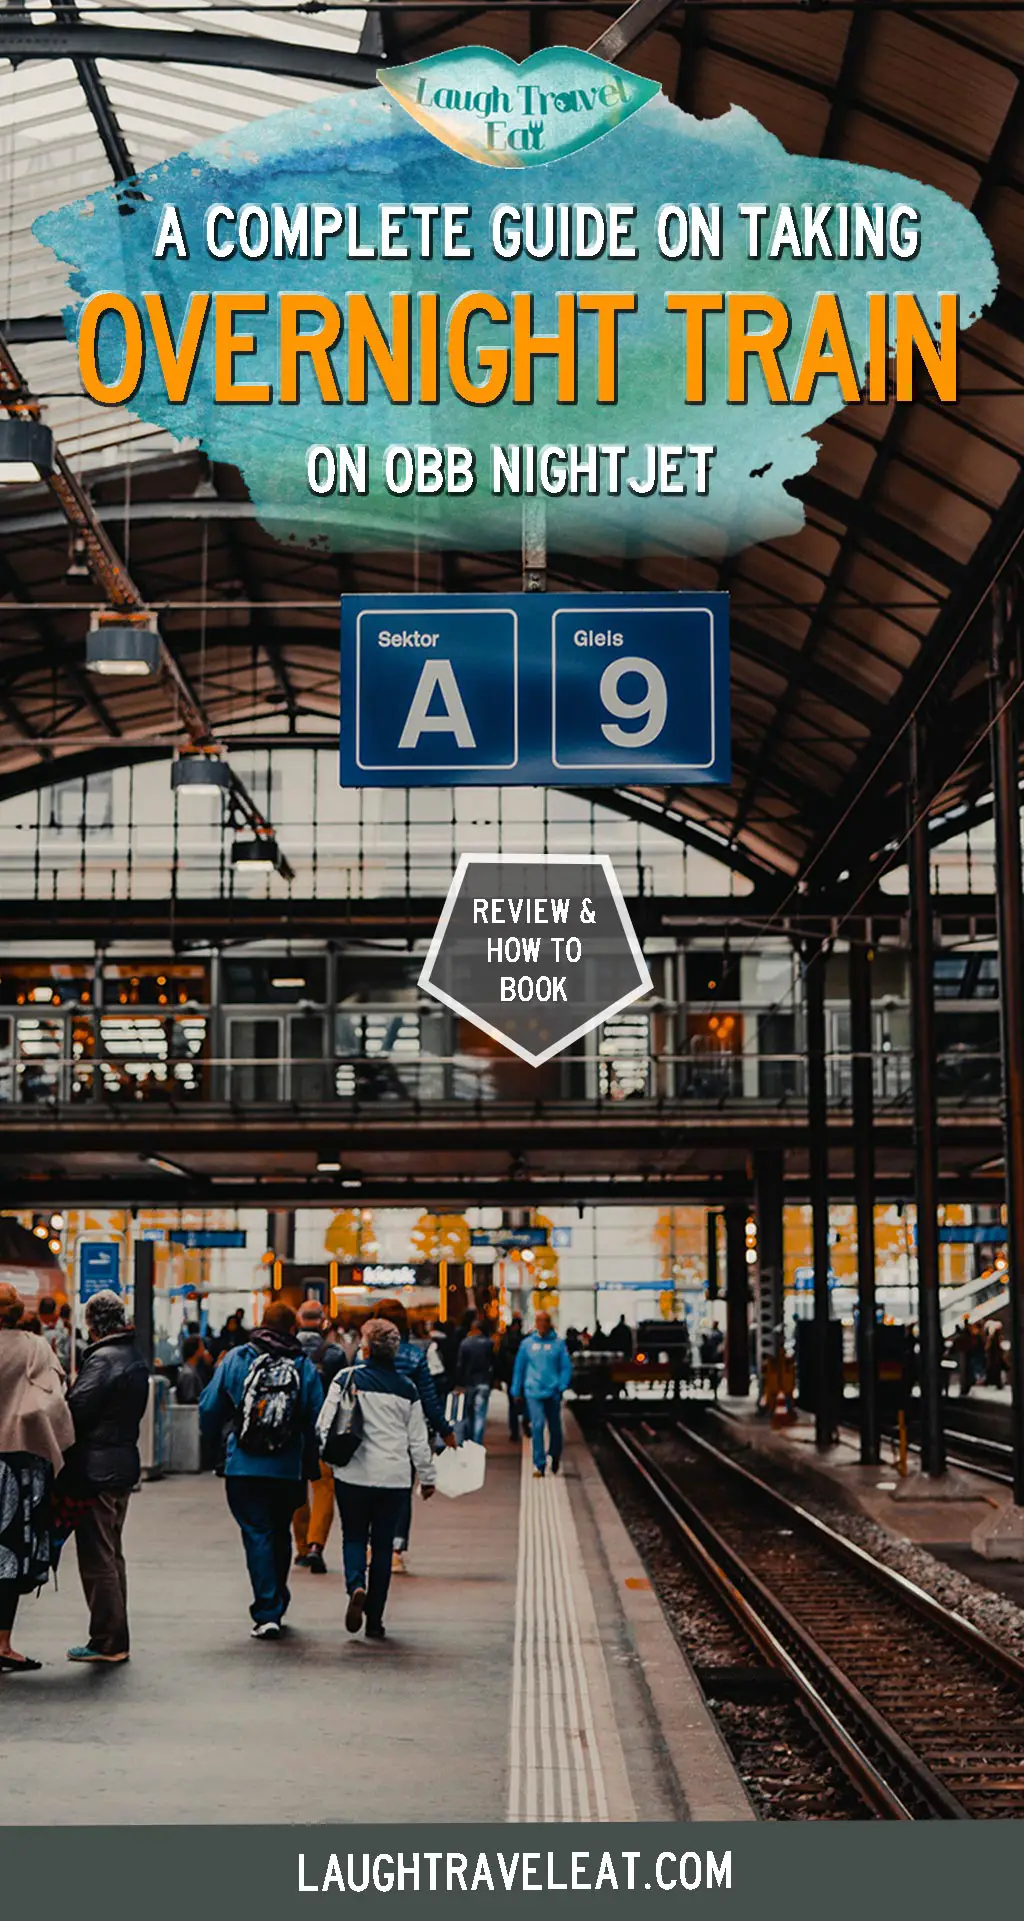 There are many night trains routes that can take you from one point of Europe to another overnight, so you can wake up in a new city without spending extra on hotel and arriving right in the center. On my recent 6 weeks trip, I took 3 night train and here’s how to book a night train, where the routes run, and what my experience is: #Europe #train #nightrain